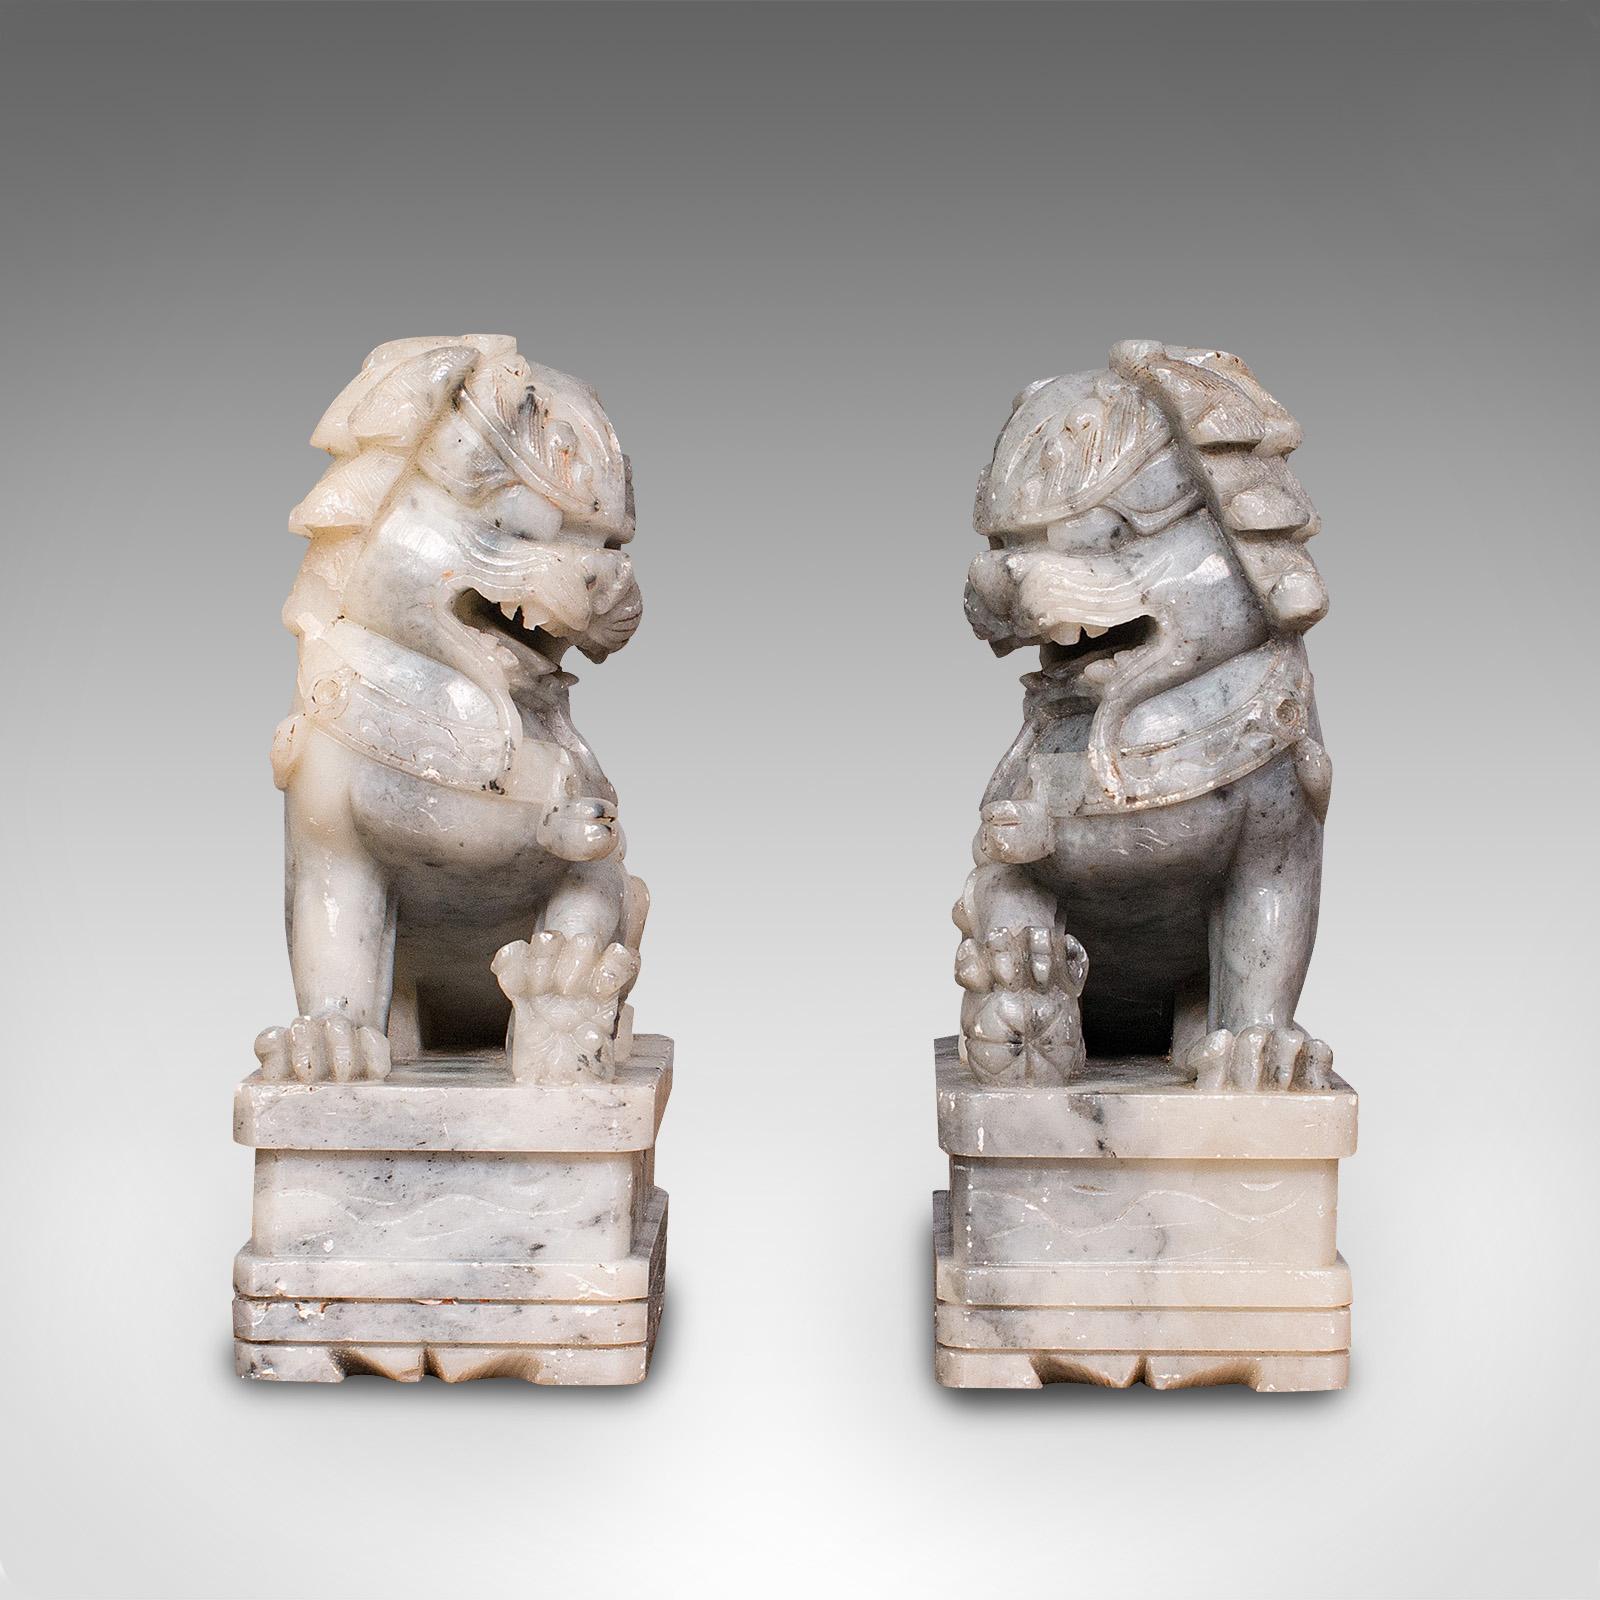 Soapstone Pair, Antique Decorative Dogs Of Fu, Chinese, Statue, Ornament, Victorian, 1900